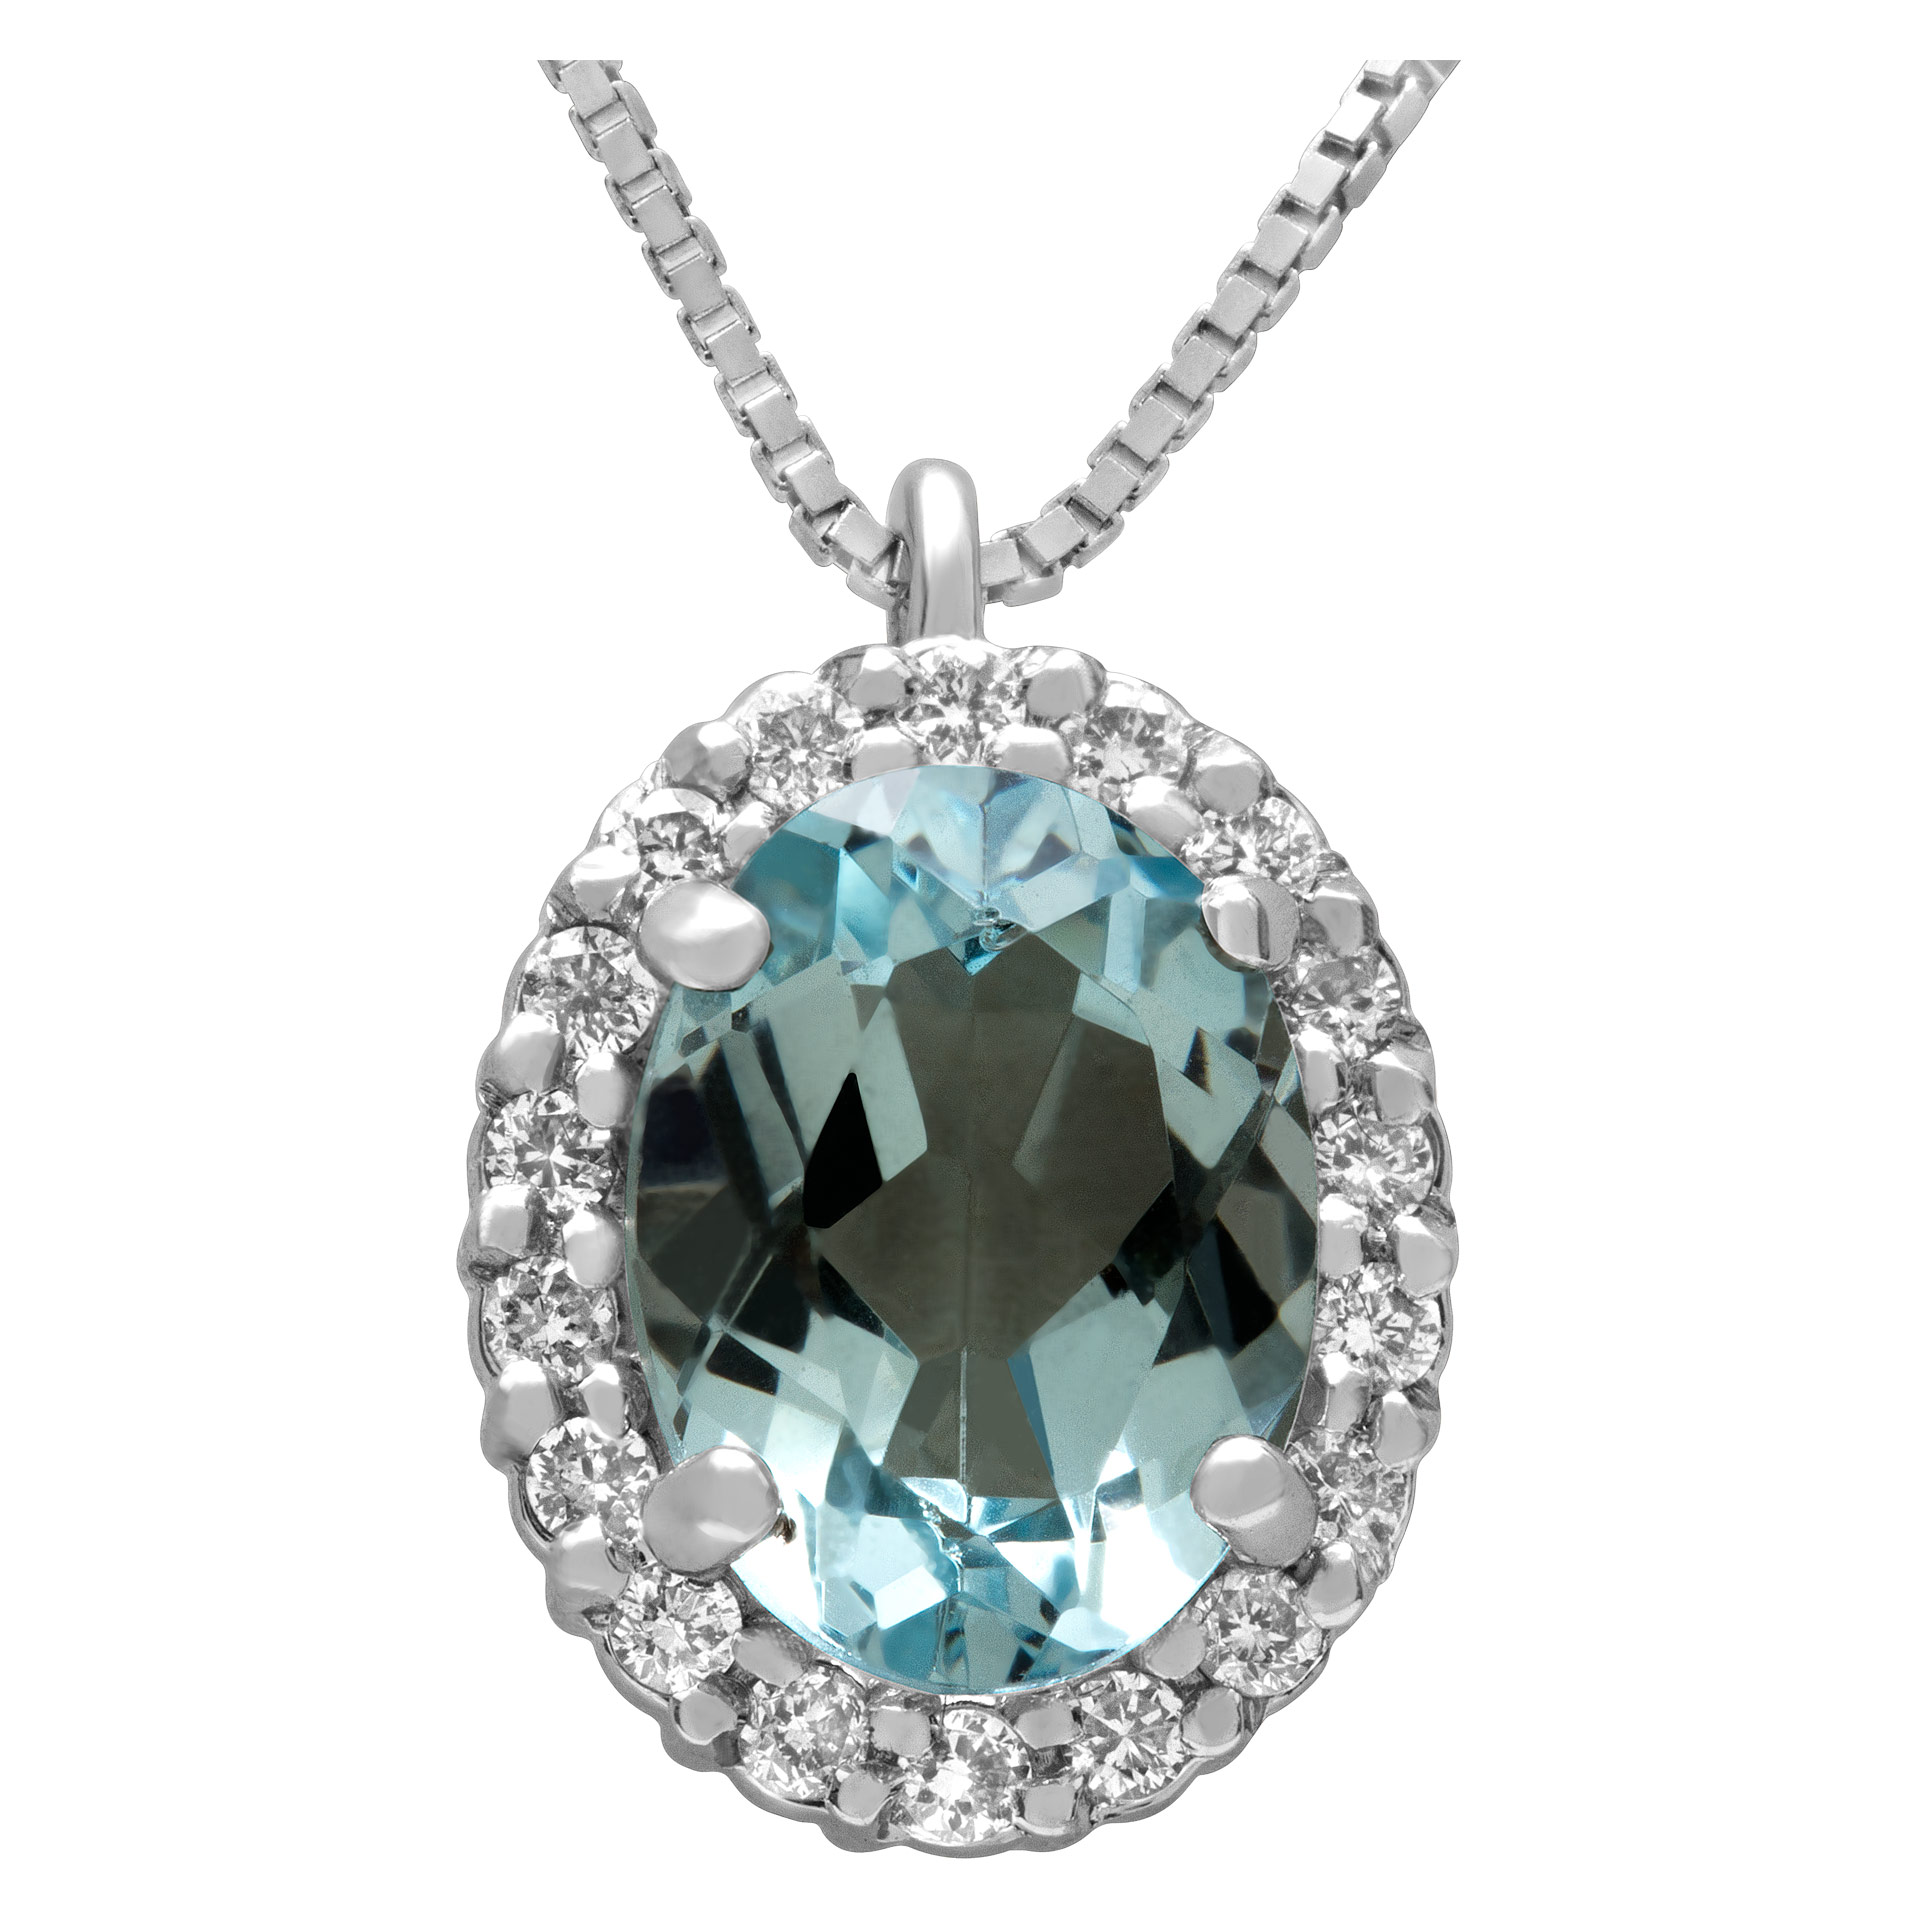 Cute oval Aquamarine pendant with 0.14 cts in diamond accents in 18k white gold